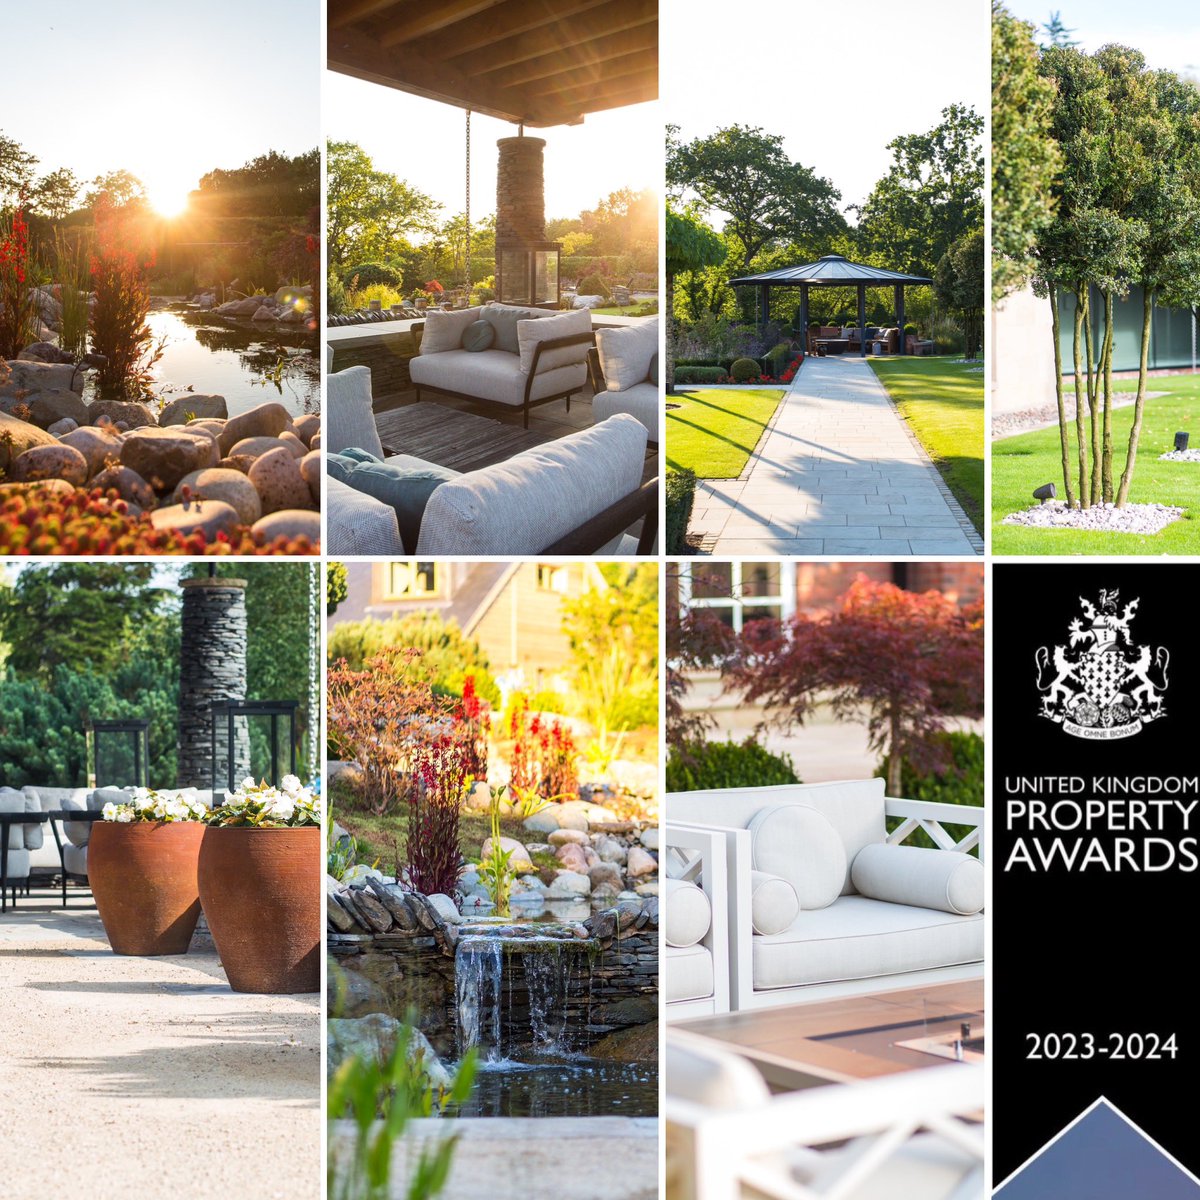 News just in from London… Barnes Walker are winners of Best Landscape Architecture in Europe for our Cheshire Garden @ No. 52 @Property_Awards 2023-2024!! Thank you! #landscapearchitecture #gardendesign #cheshirenews #manchesternews #manchester #cheshire